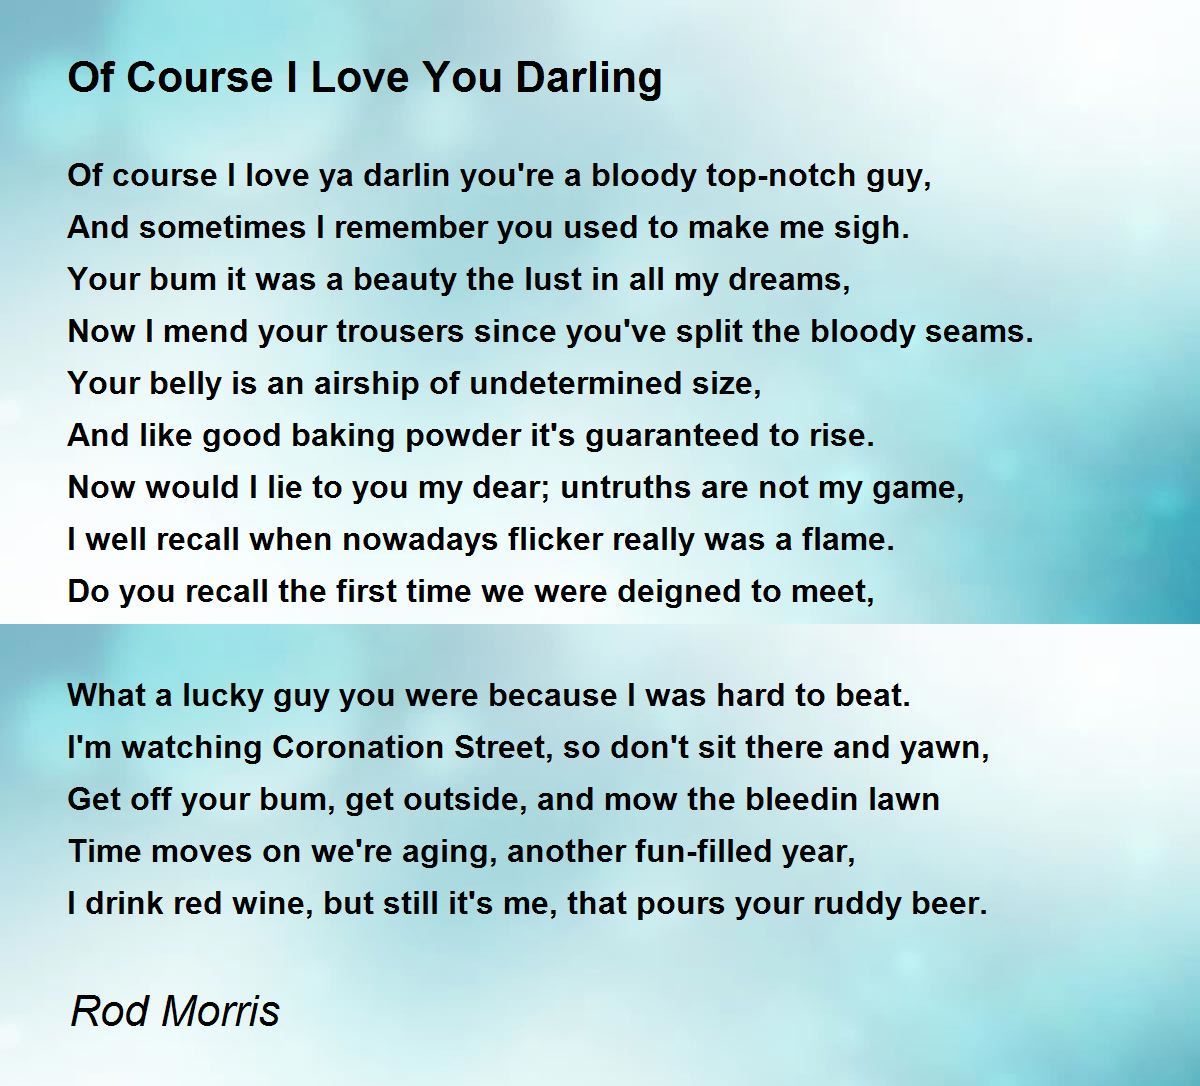 Of Course I Love You Darling - Of Course I Love You Darling Poem ...